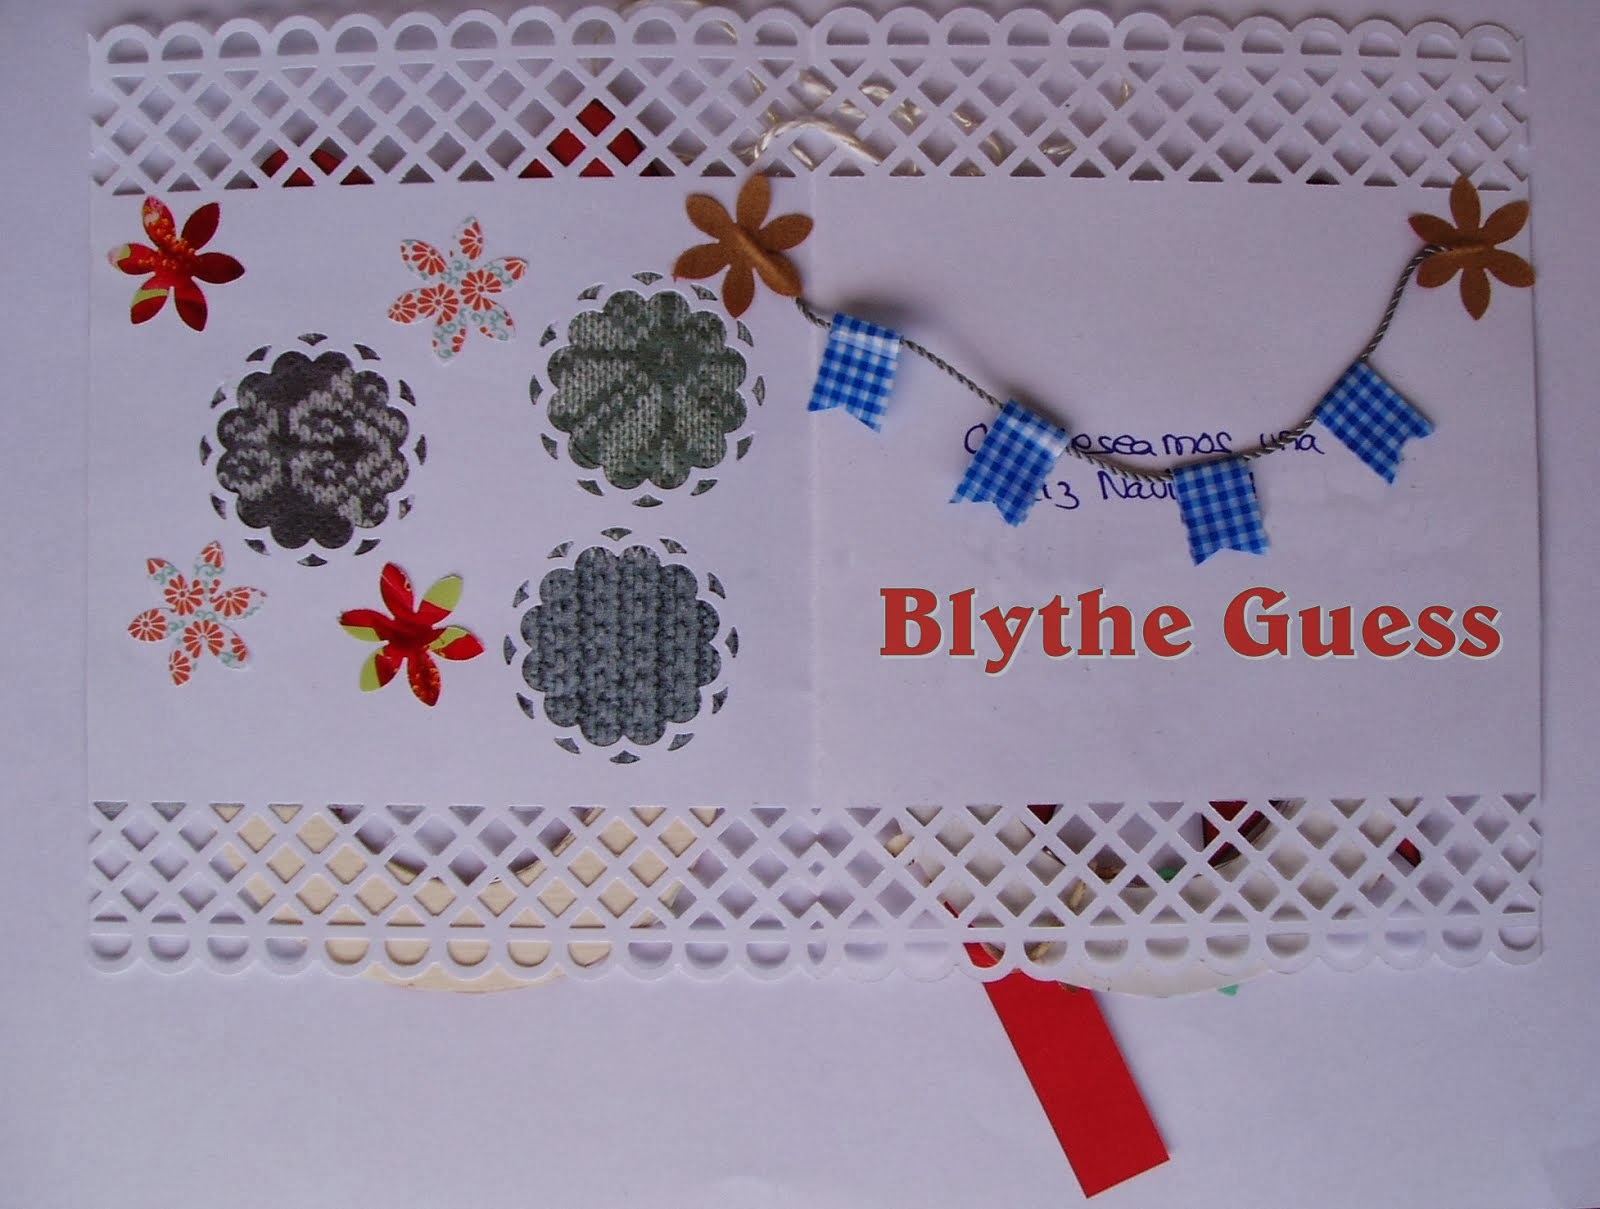 by Blythe Guess